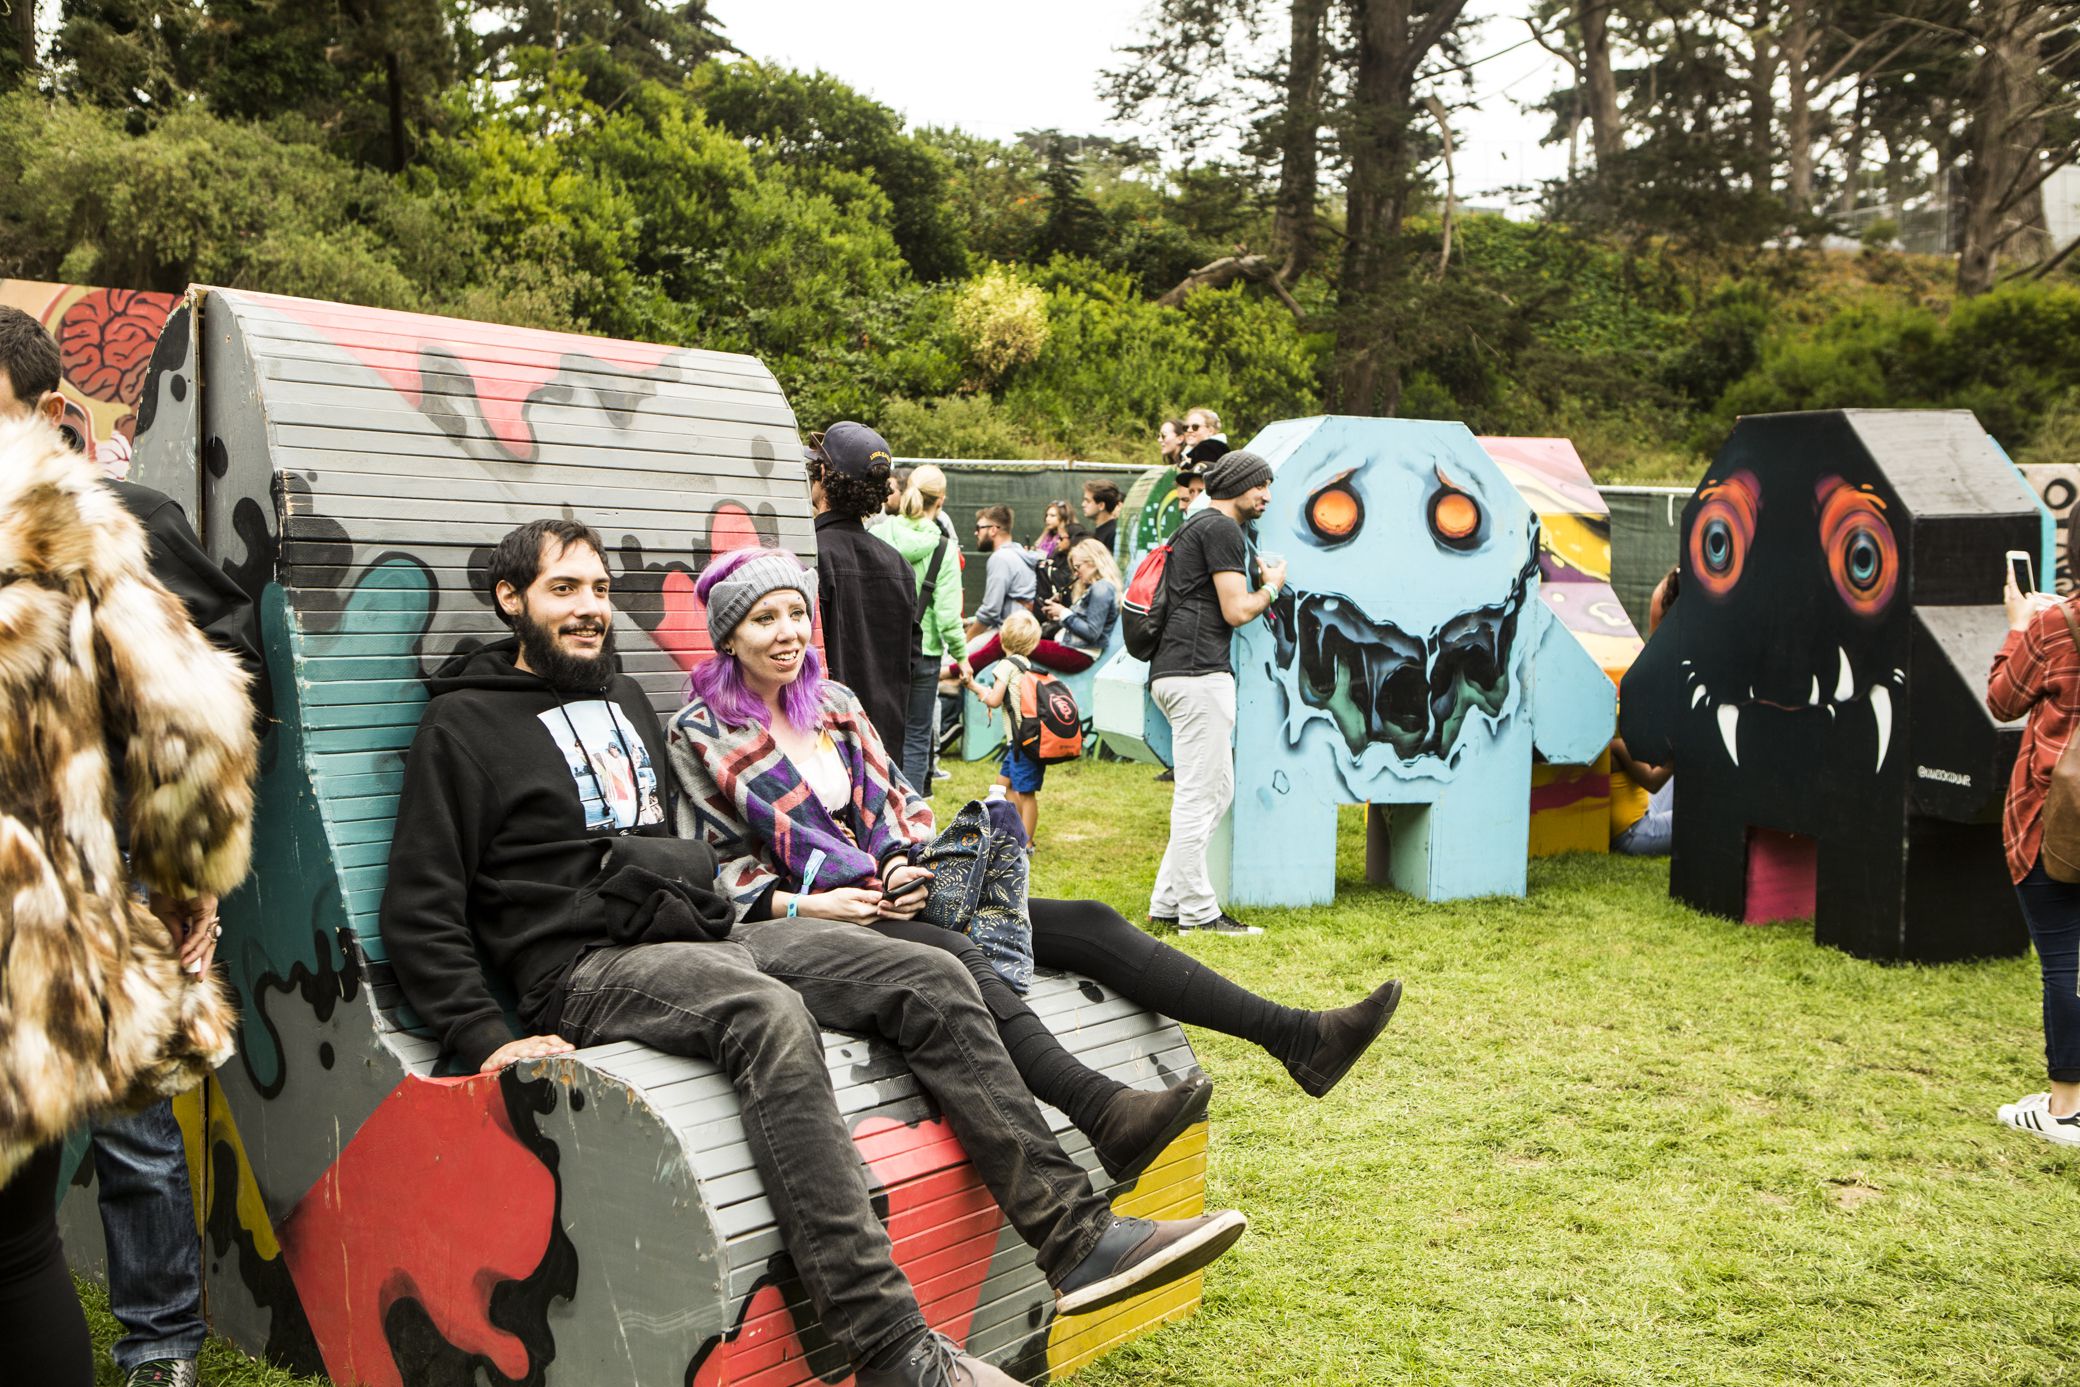 outside lands 2017 4 Outside Lands 2017 Festival Review: From Worst to Best